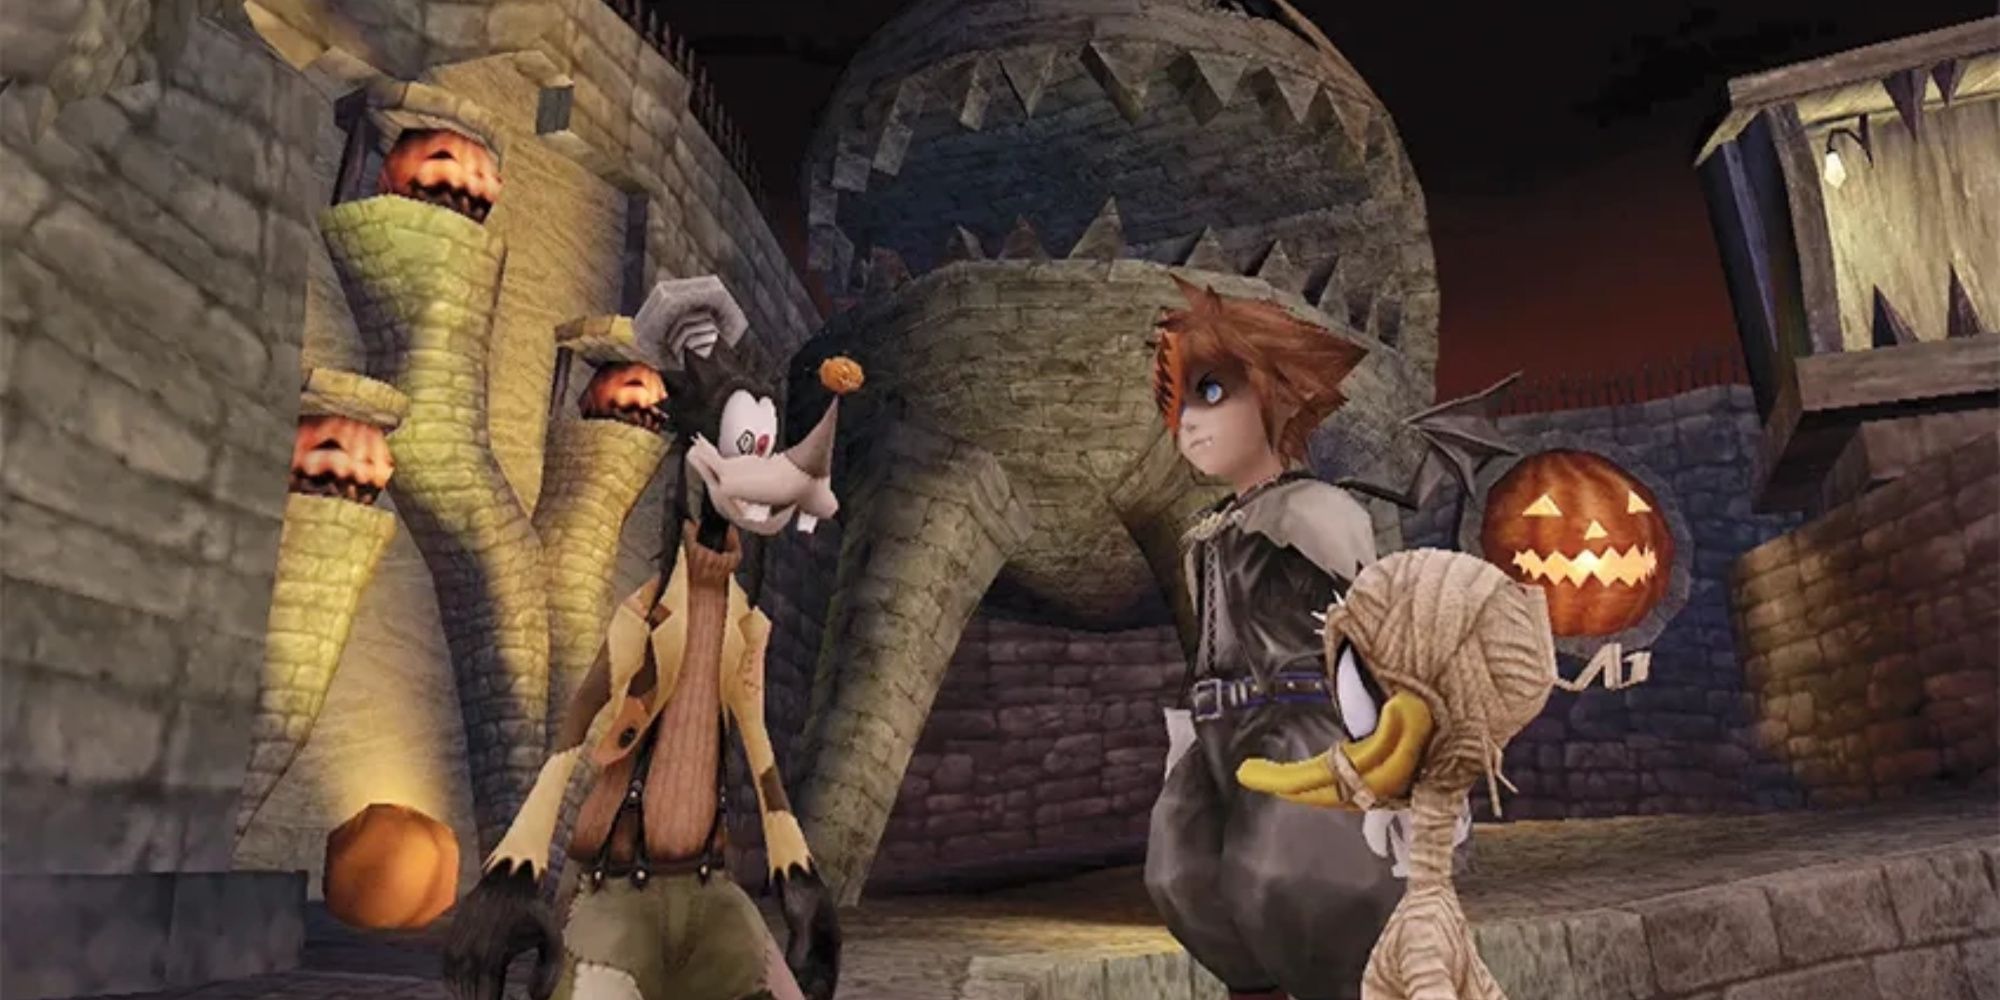 A cutscene featuring characters in Kingdom Hearts